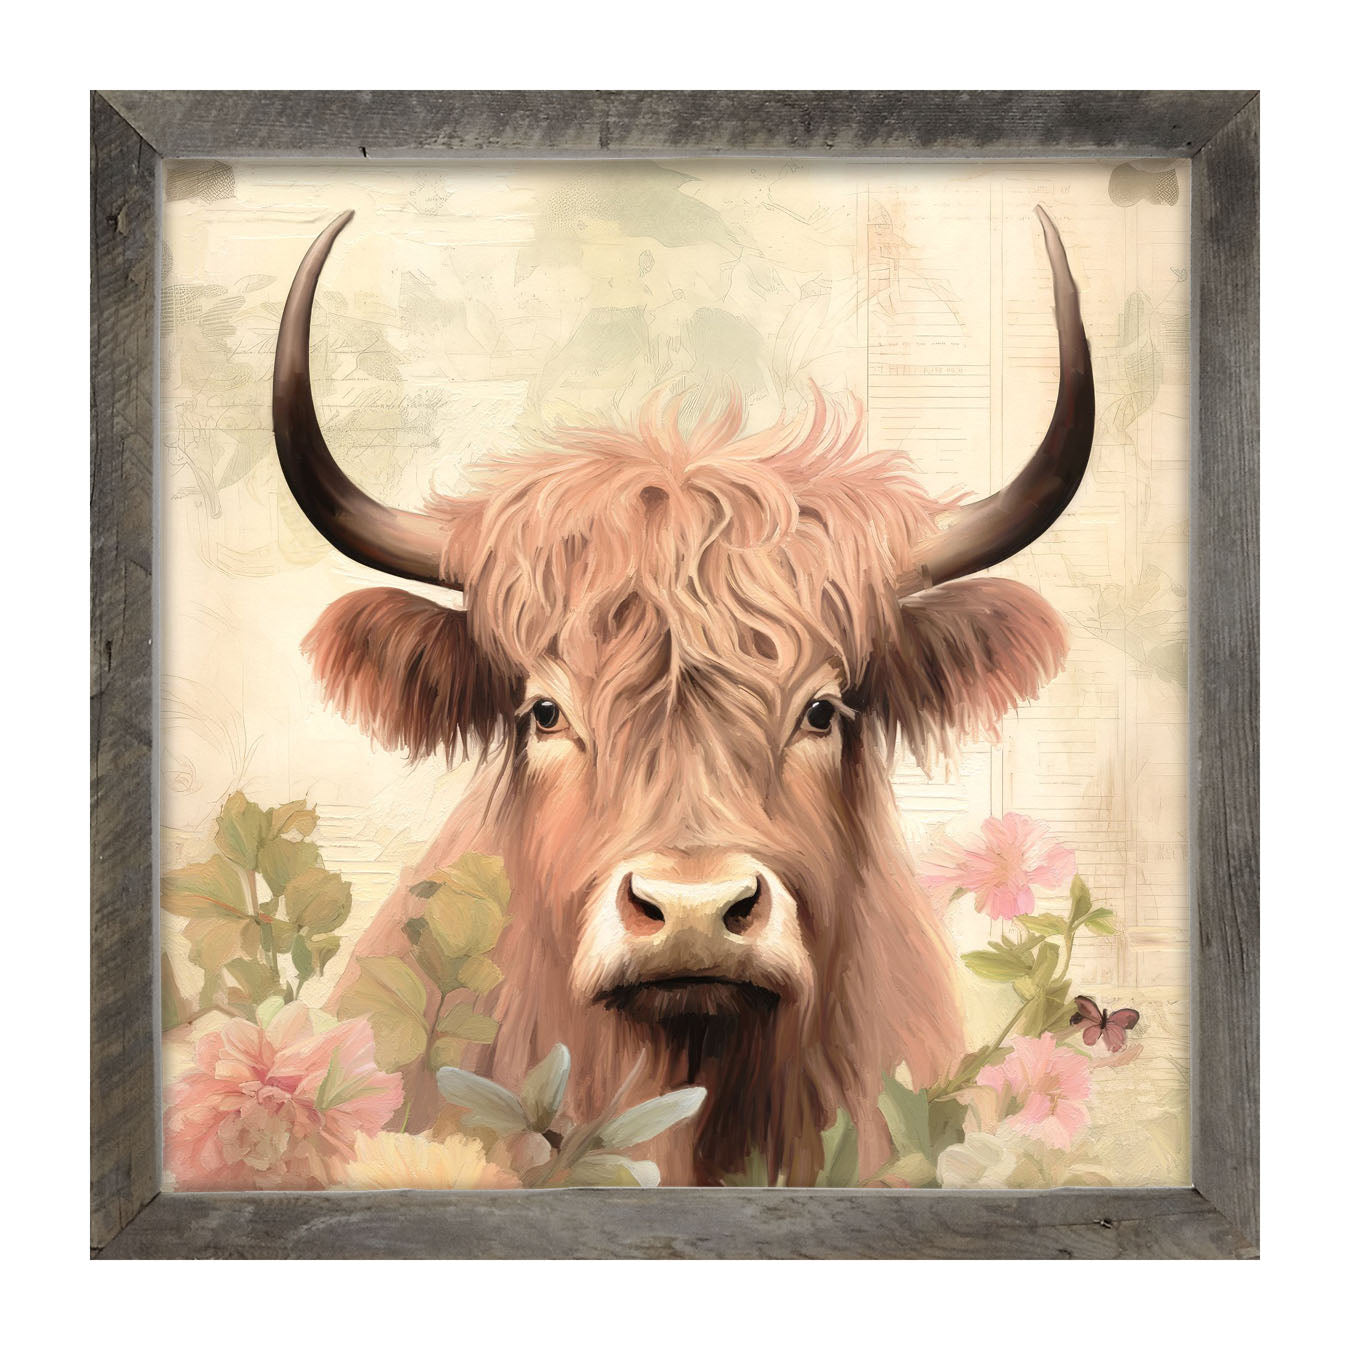 Tan Highland cow with flowers